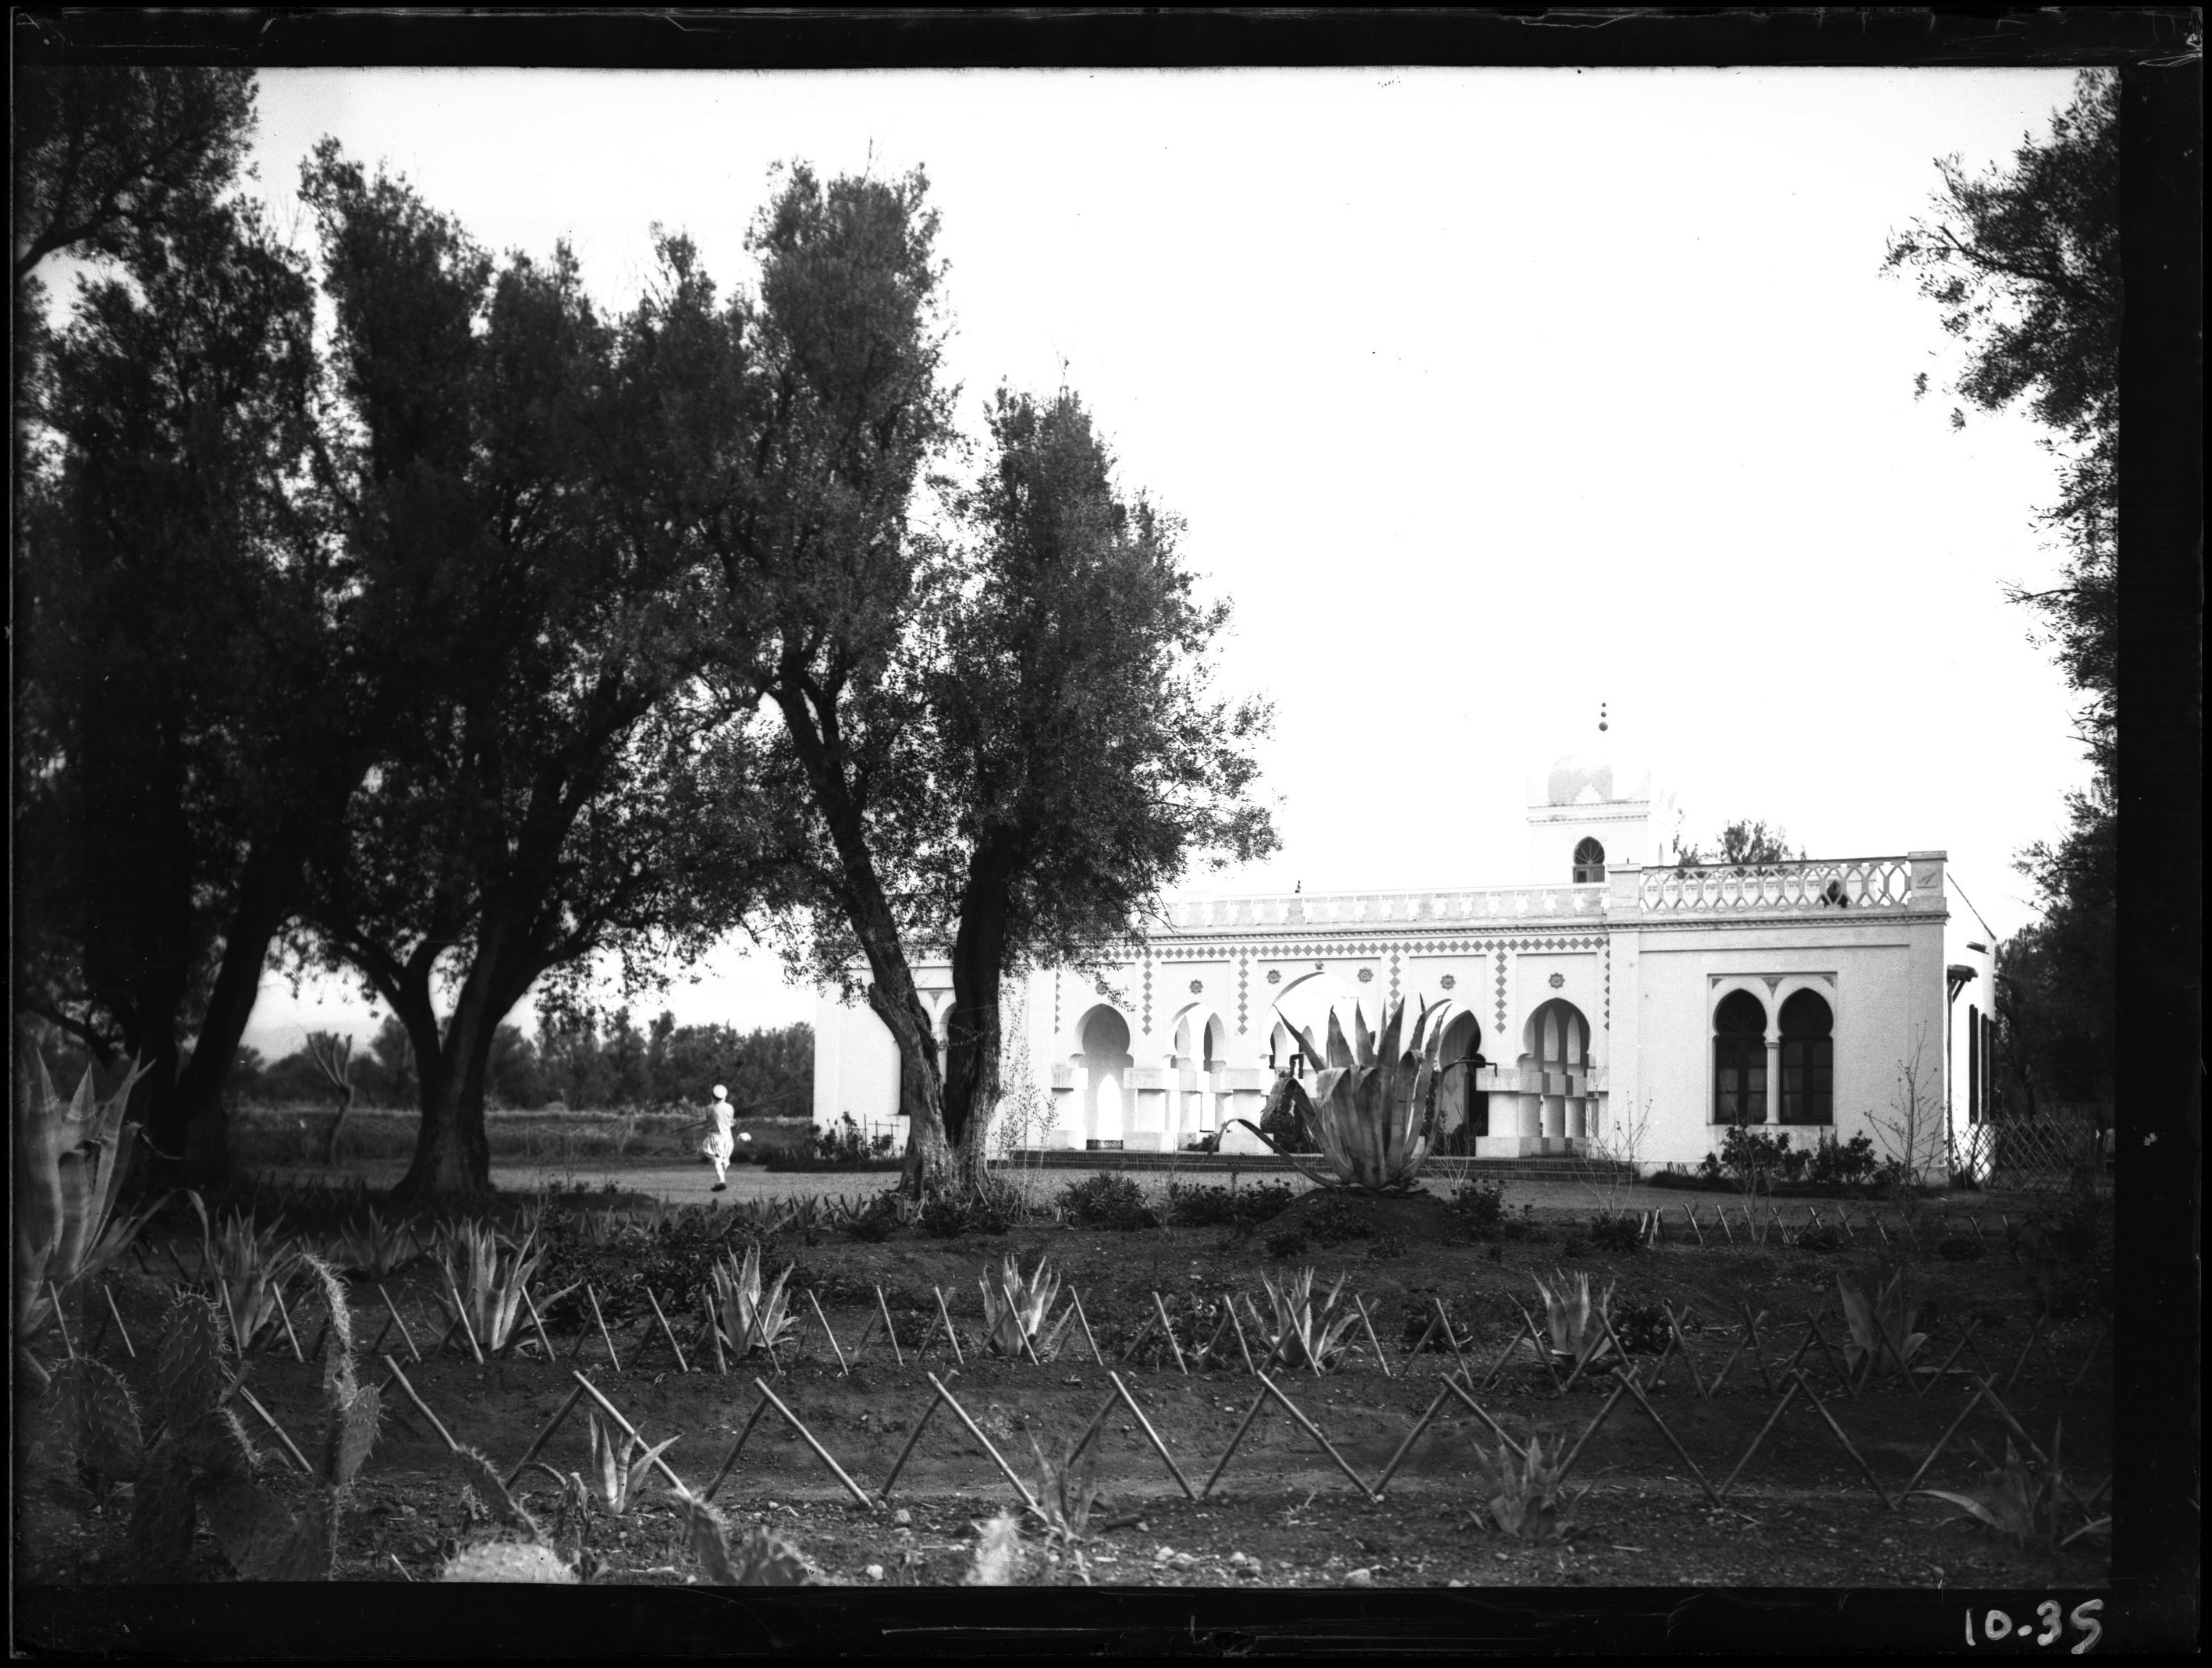 <p>Decorated building with large garden; man in Moroccan dress walking through</p>